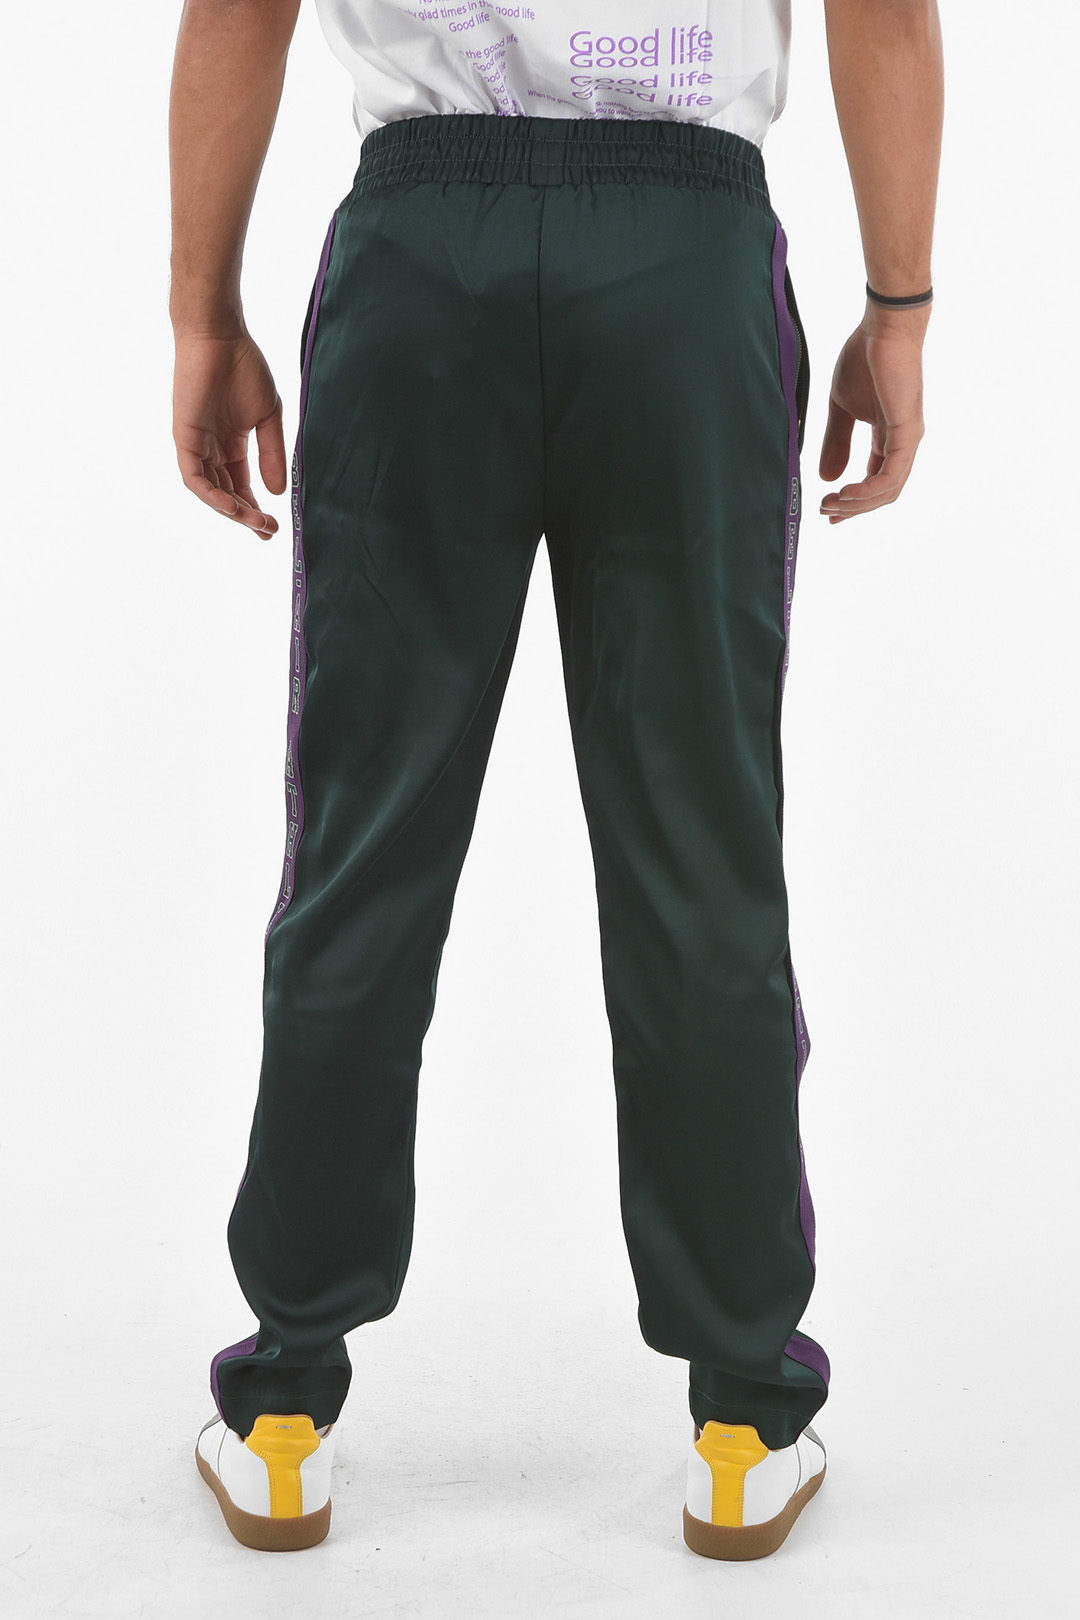 Bel Air Athletics Jersey ACADEMY CREST Joggers with Contrasting